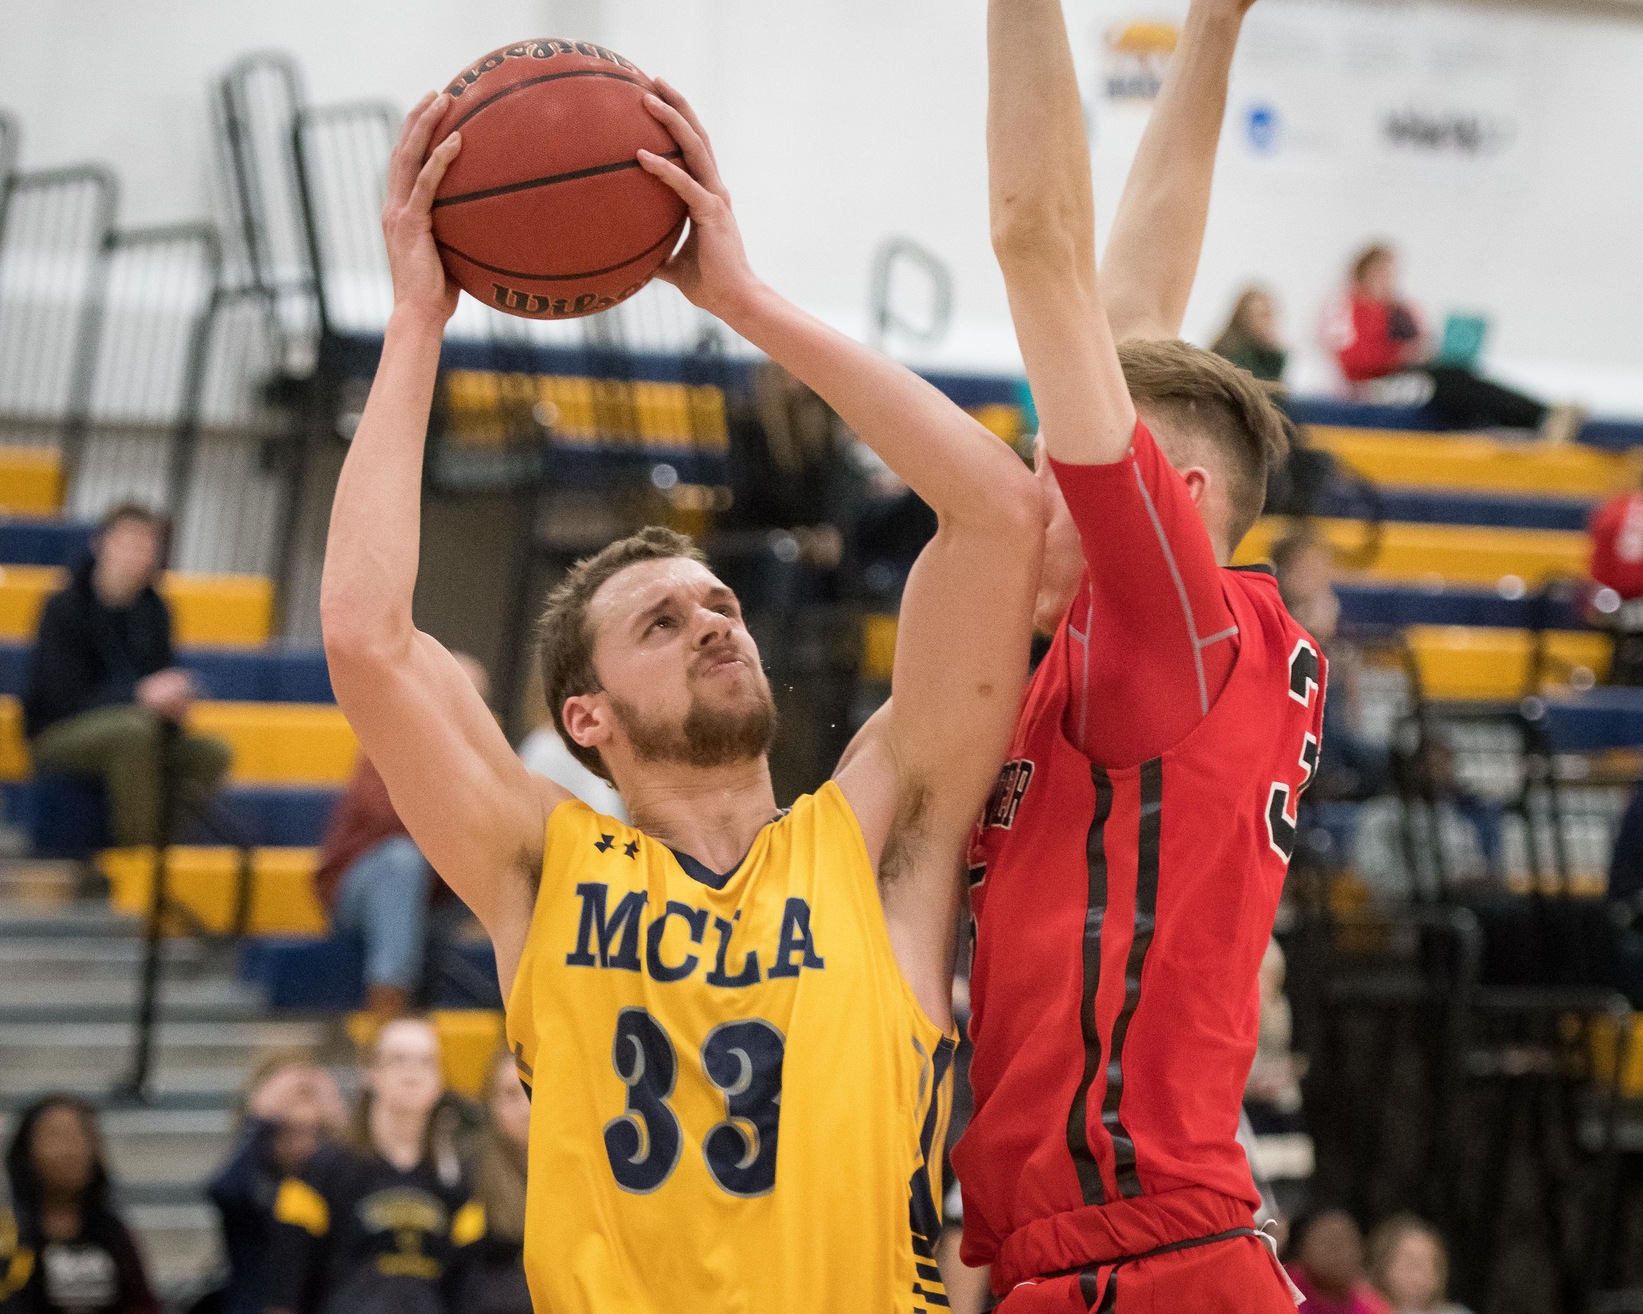 Turnovers plague MCLA Men's Basketball in 70-62 loss to Pine Manor